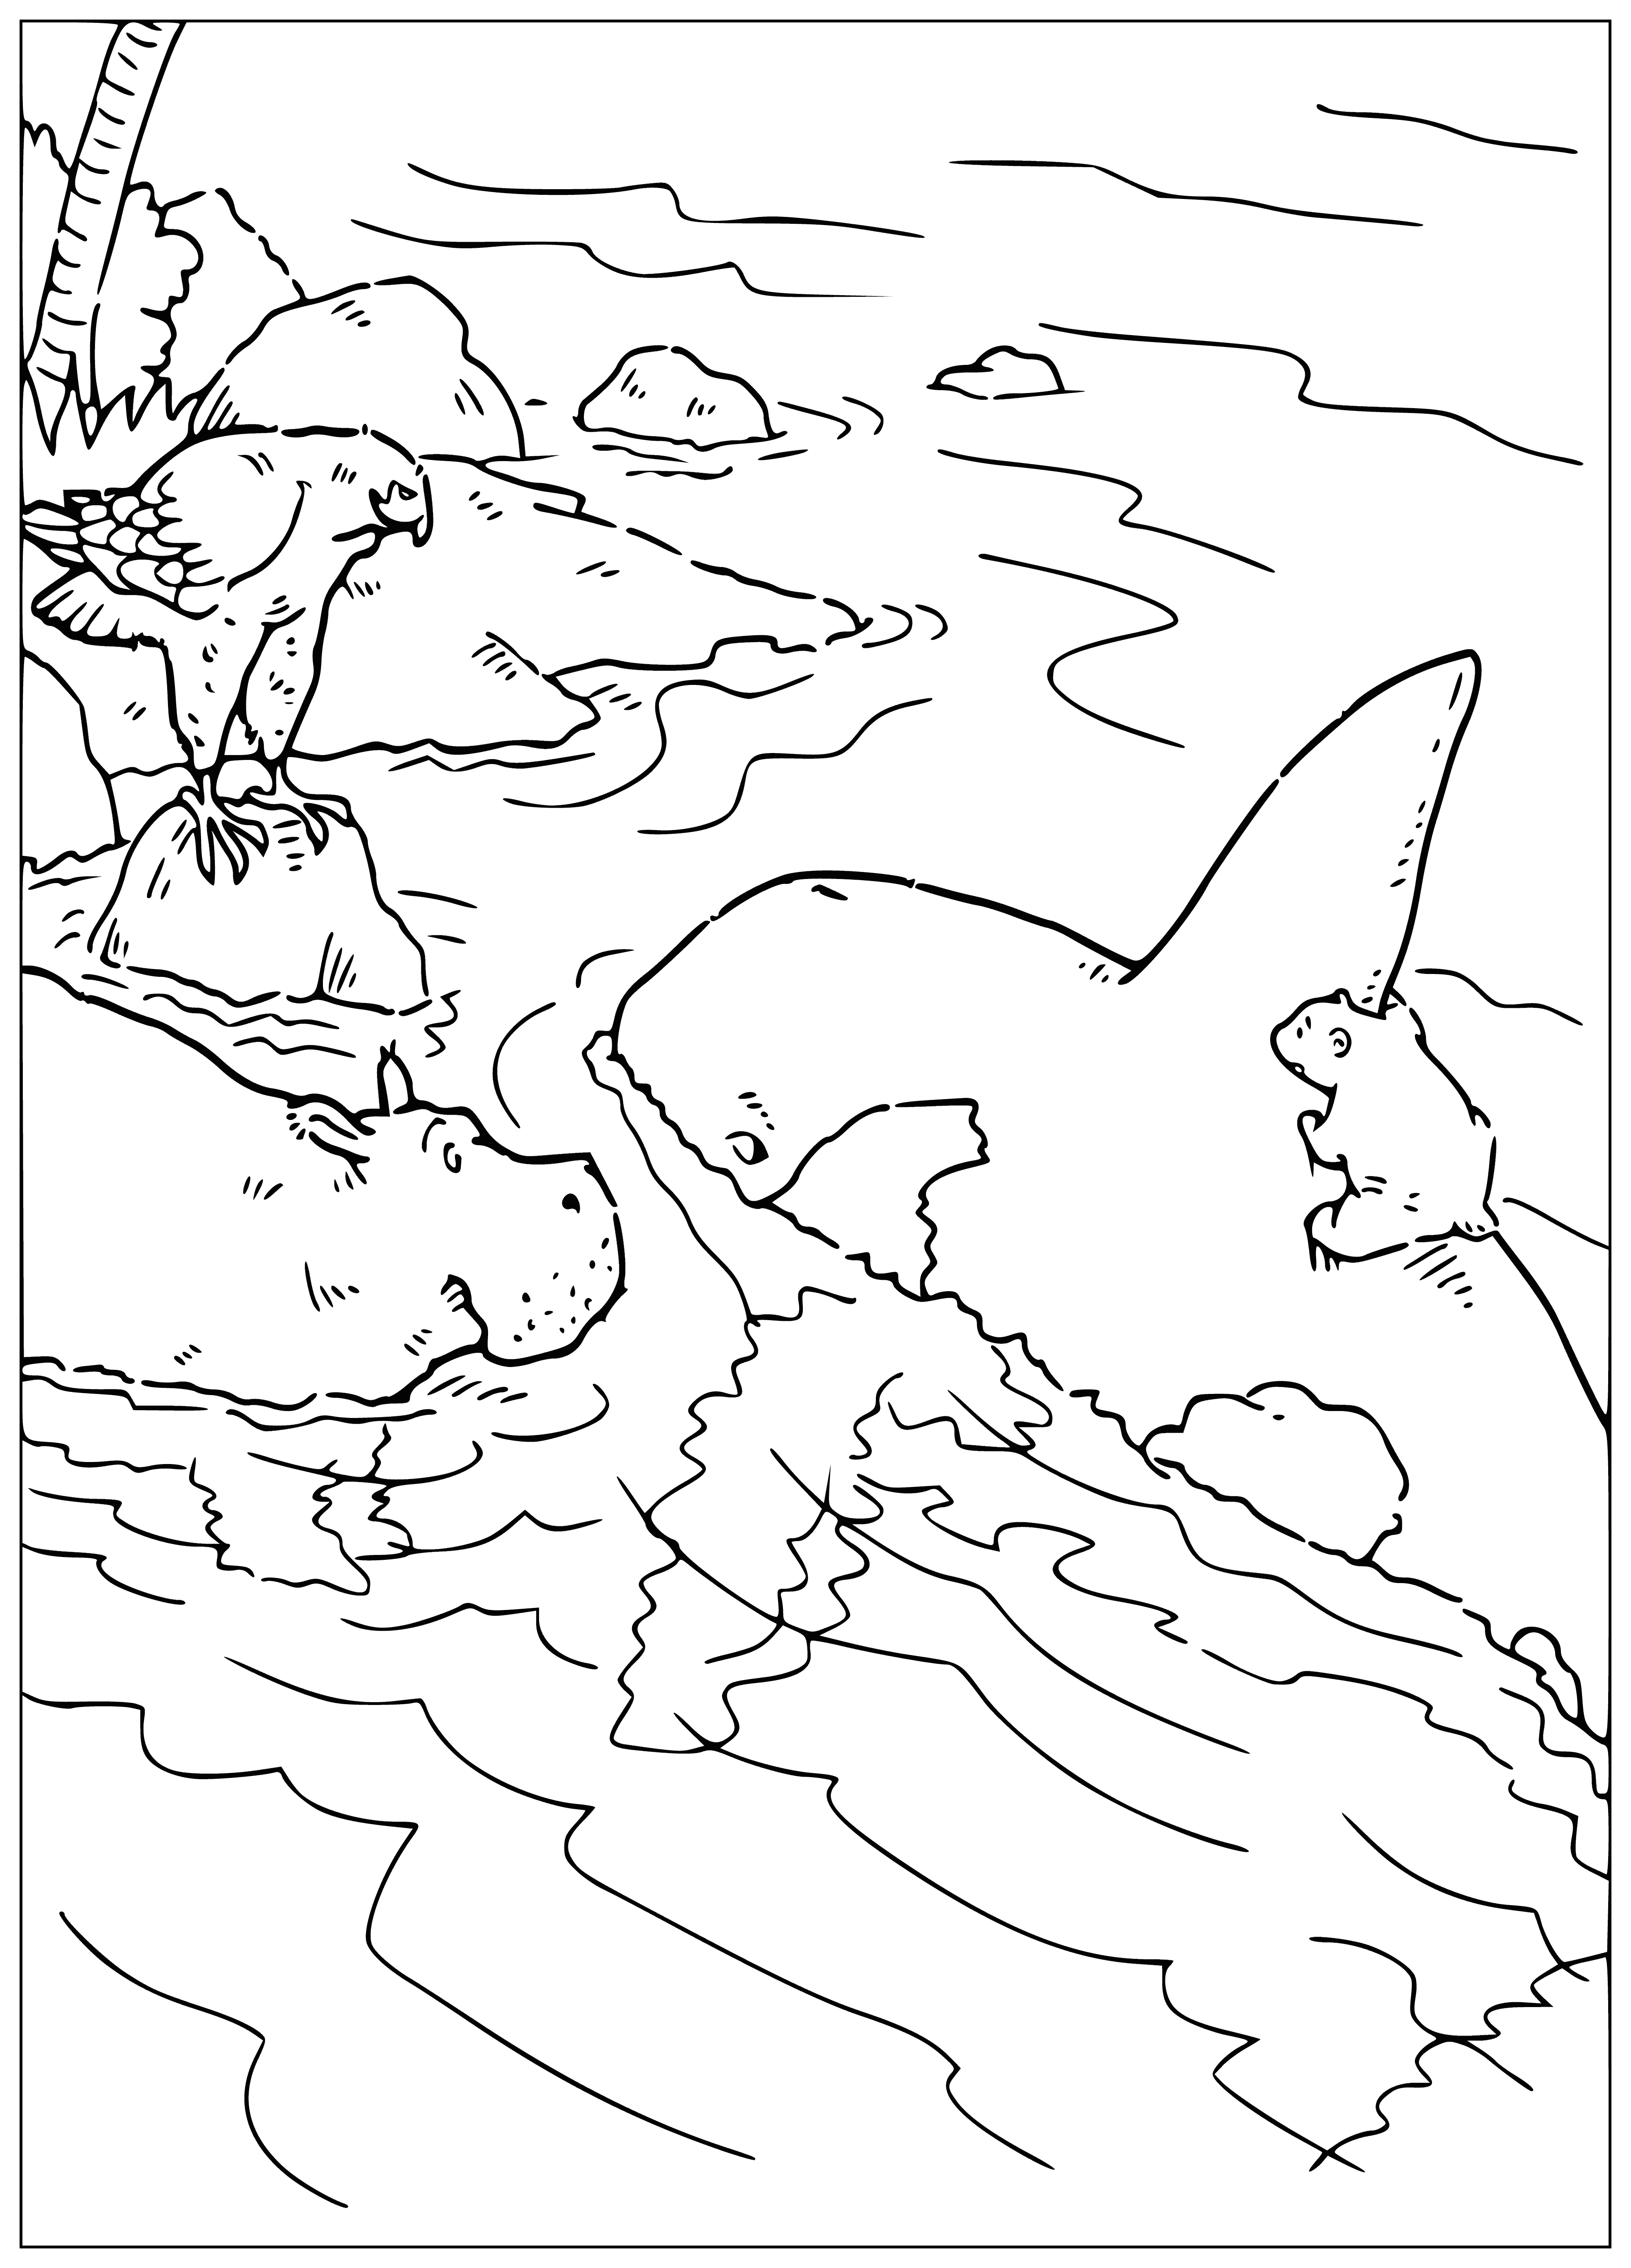 coloring page: Polar bear rides killer whale through the water, grasping fin with paws & enjoying the ride!